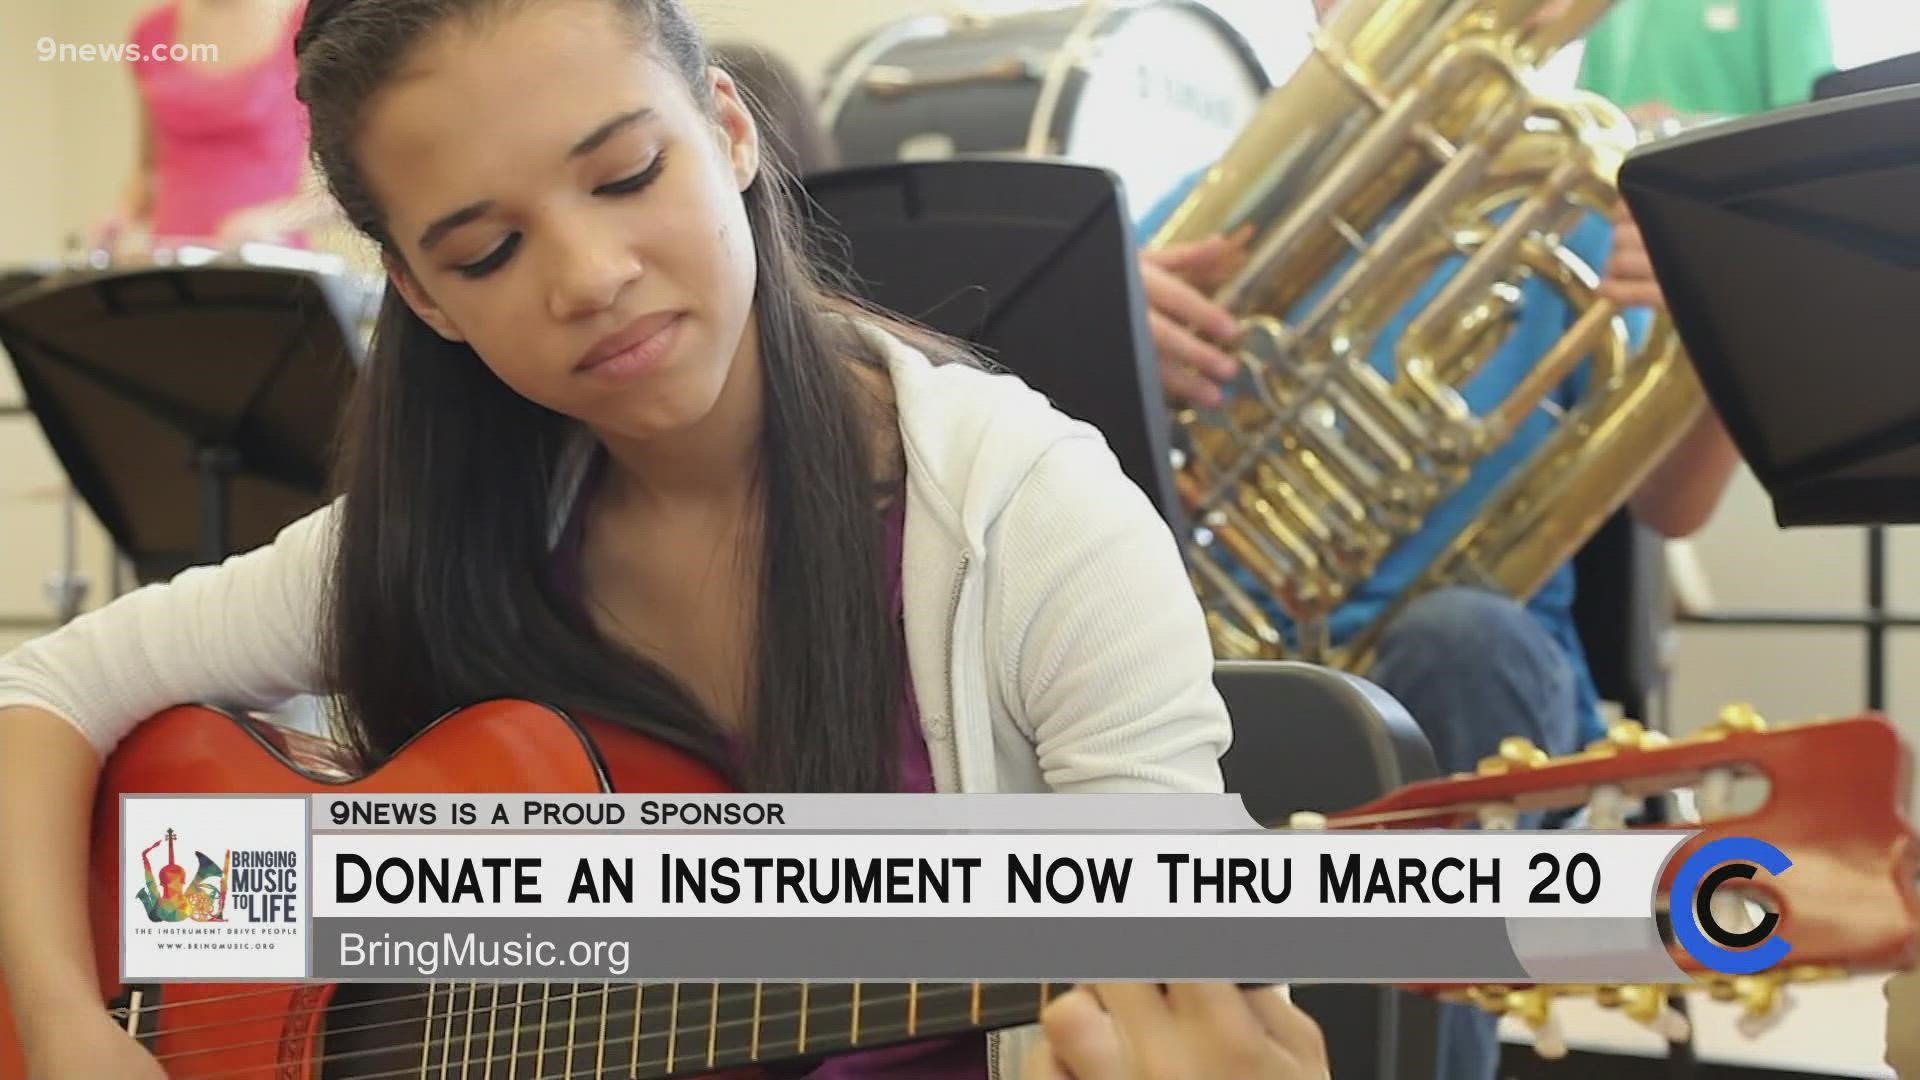 Bring your old instruments to a donation center near you. Find one at BringMusic.org.